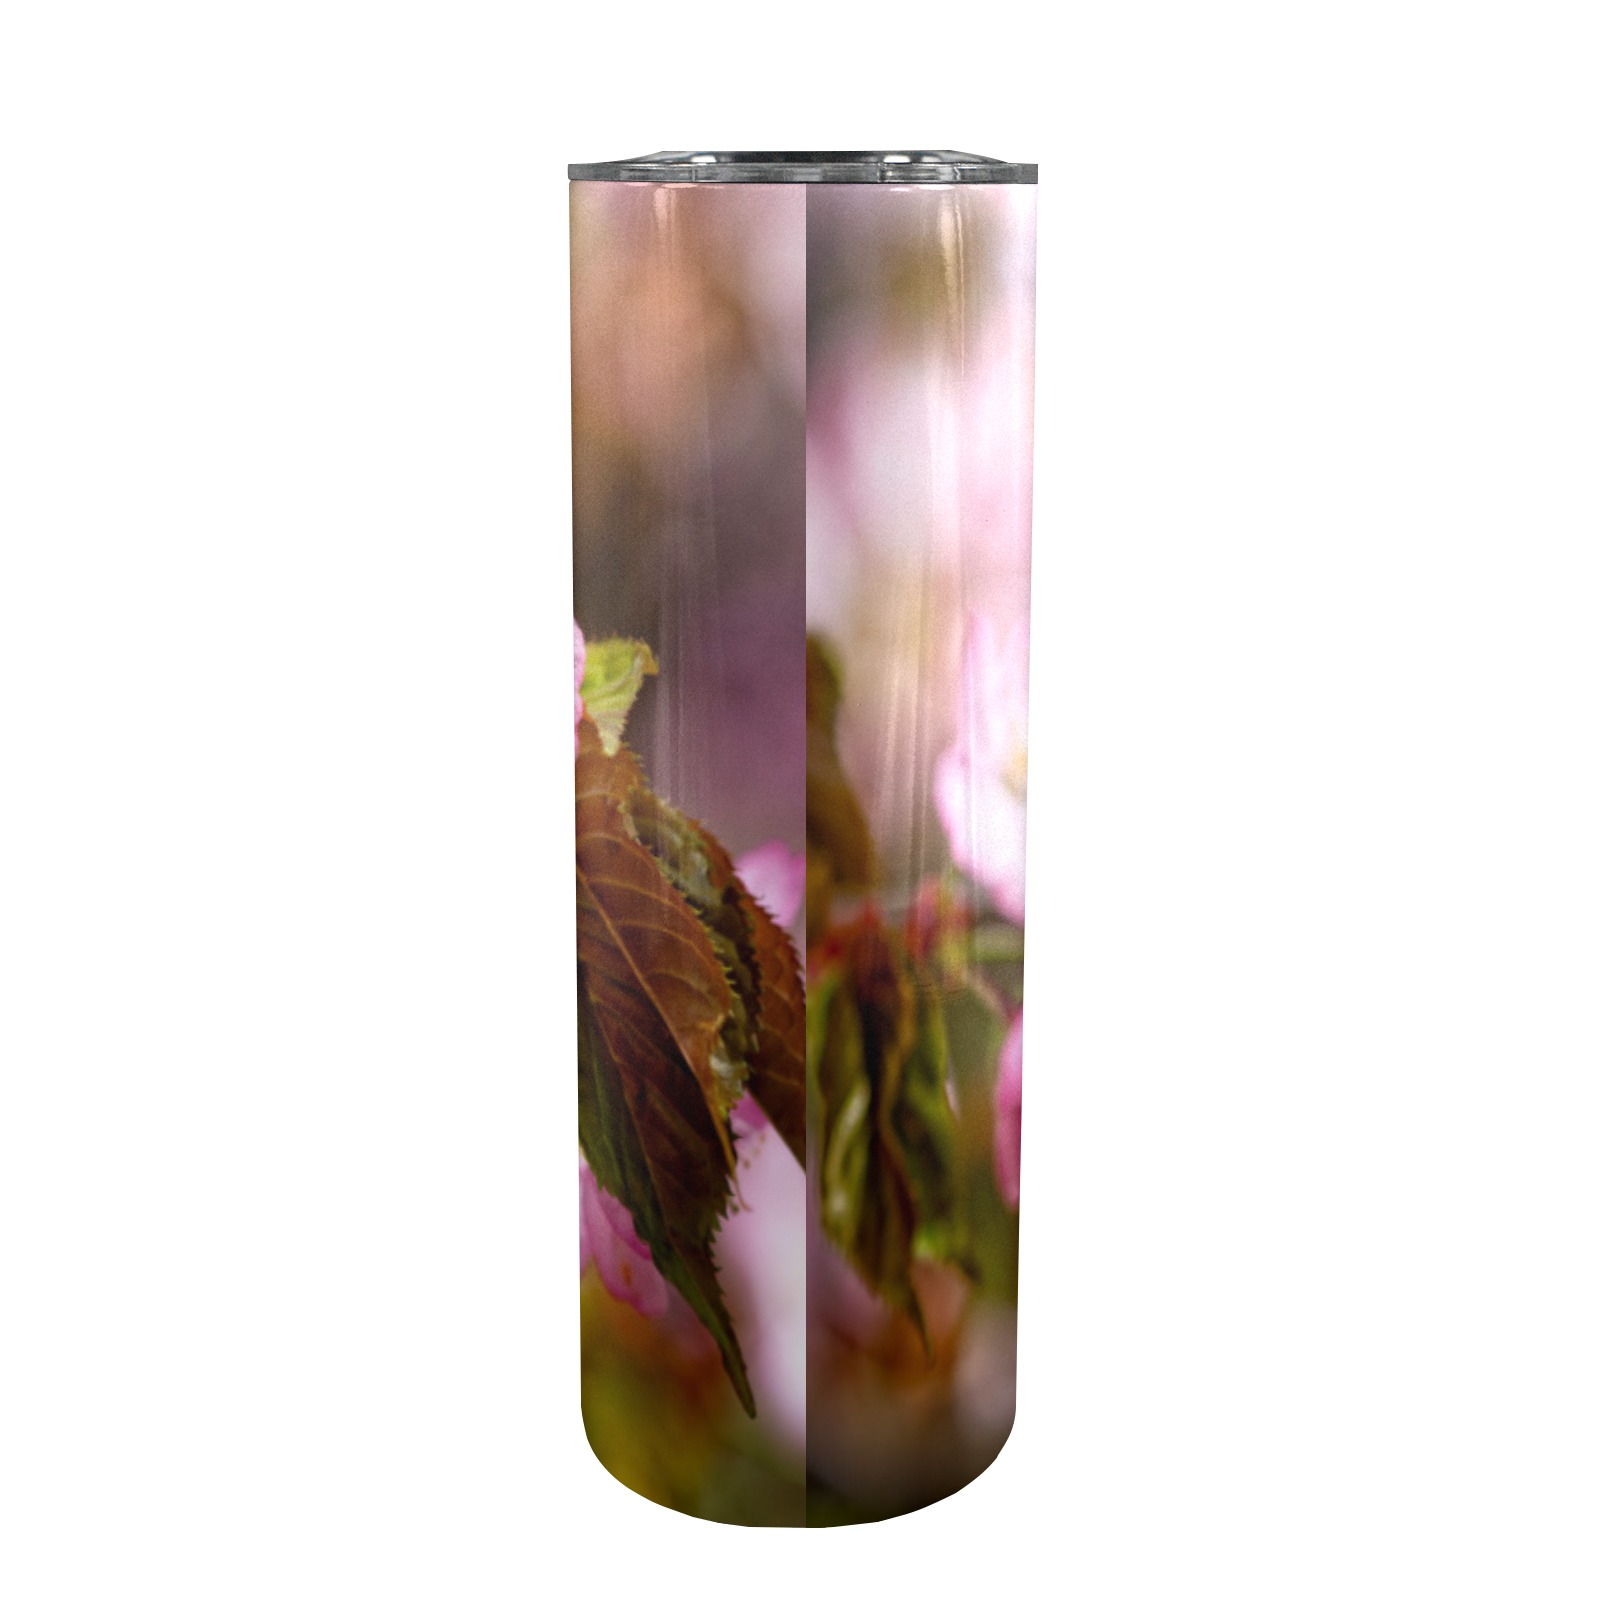 The festival of pink sakura cherry blossoms. 20oz Tall Skinny Tumbler with Lid and Straw